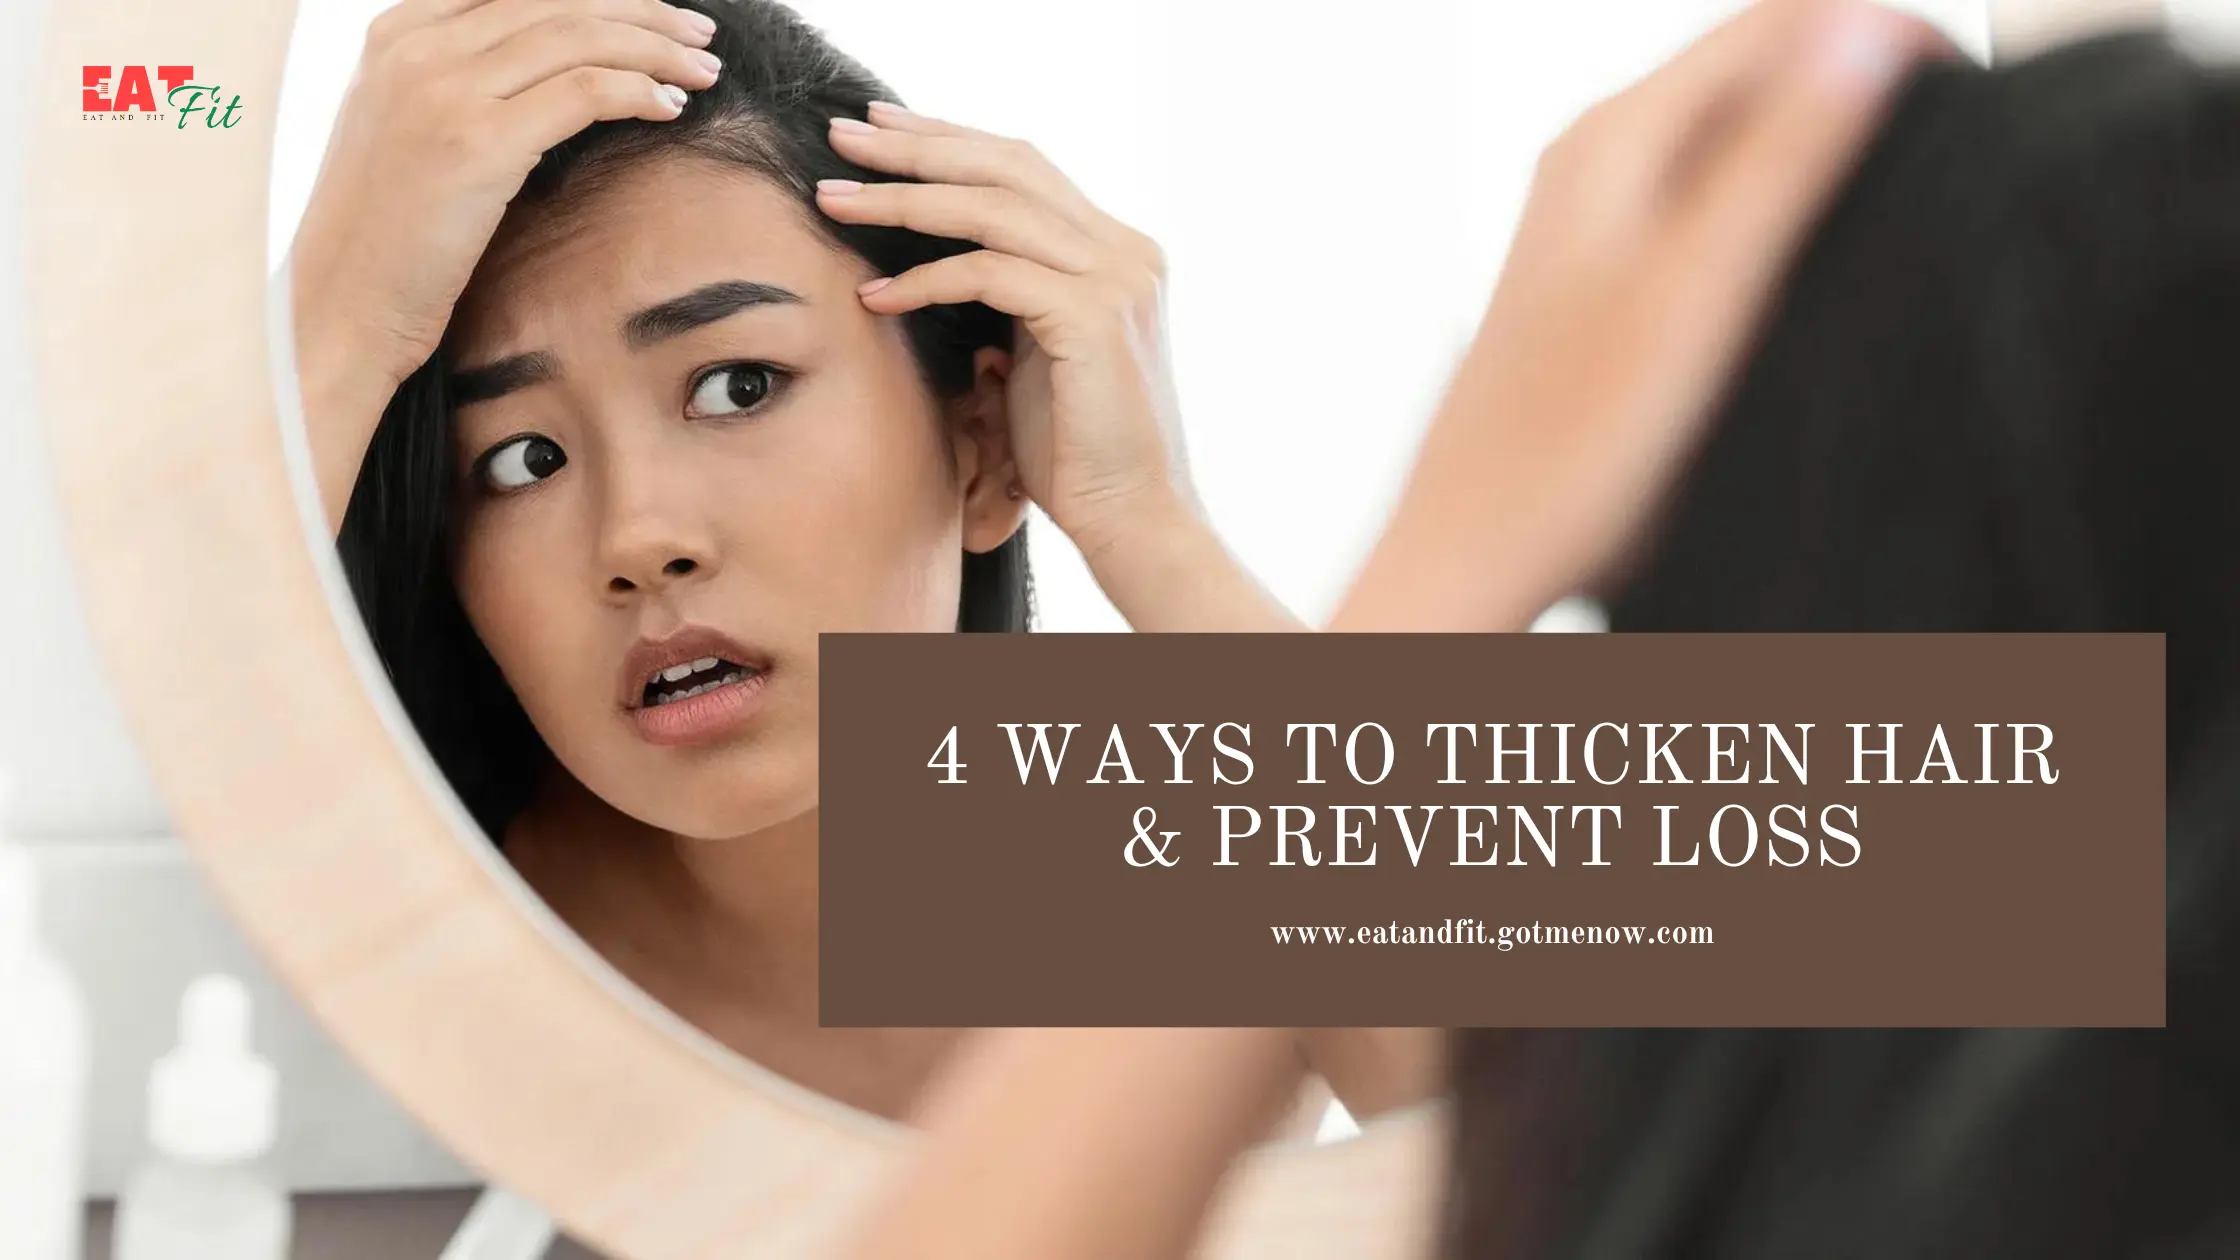 4 Proven Ways to Thicken Your Hair and Prevent Hair Loss